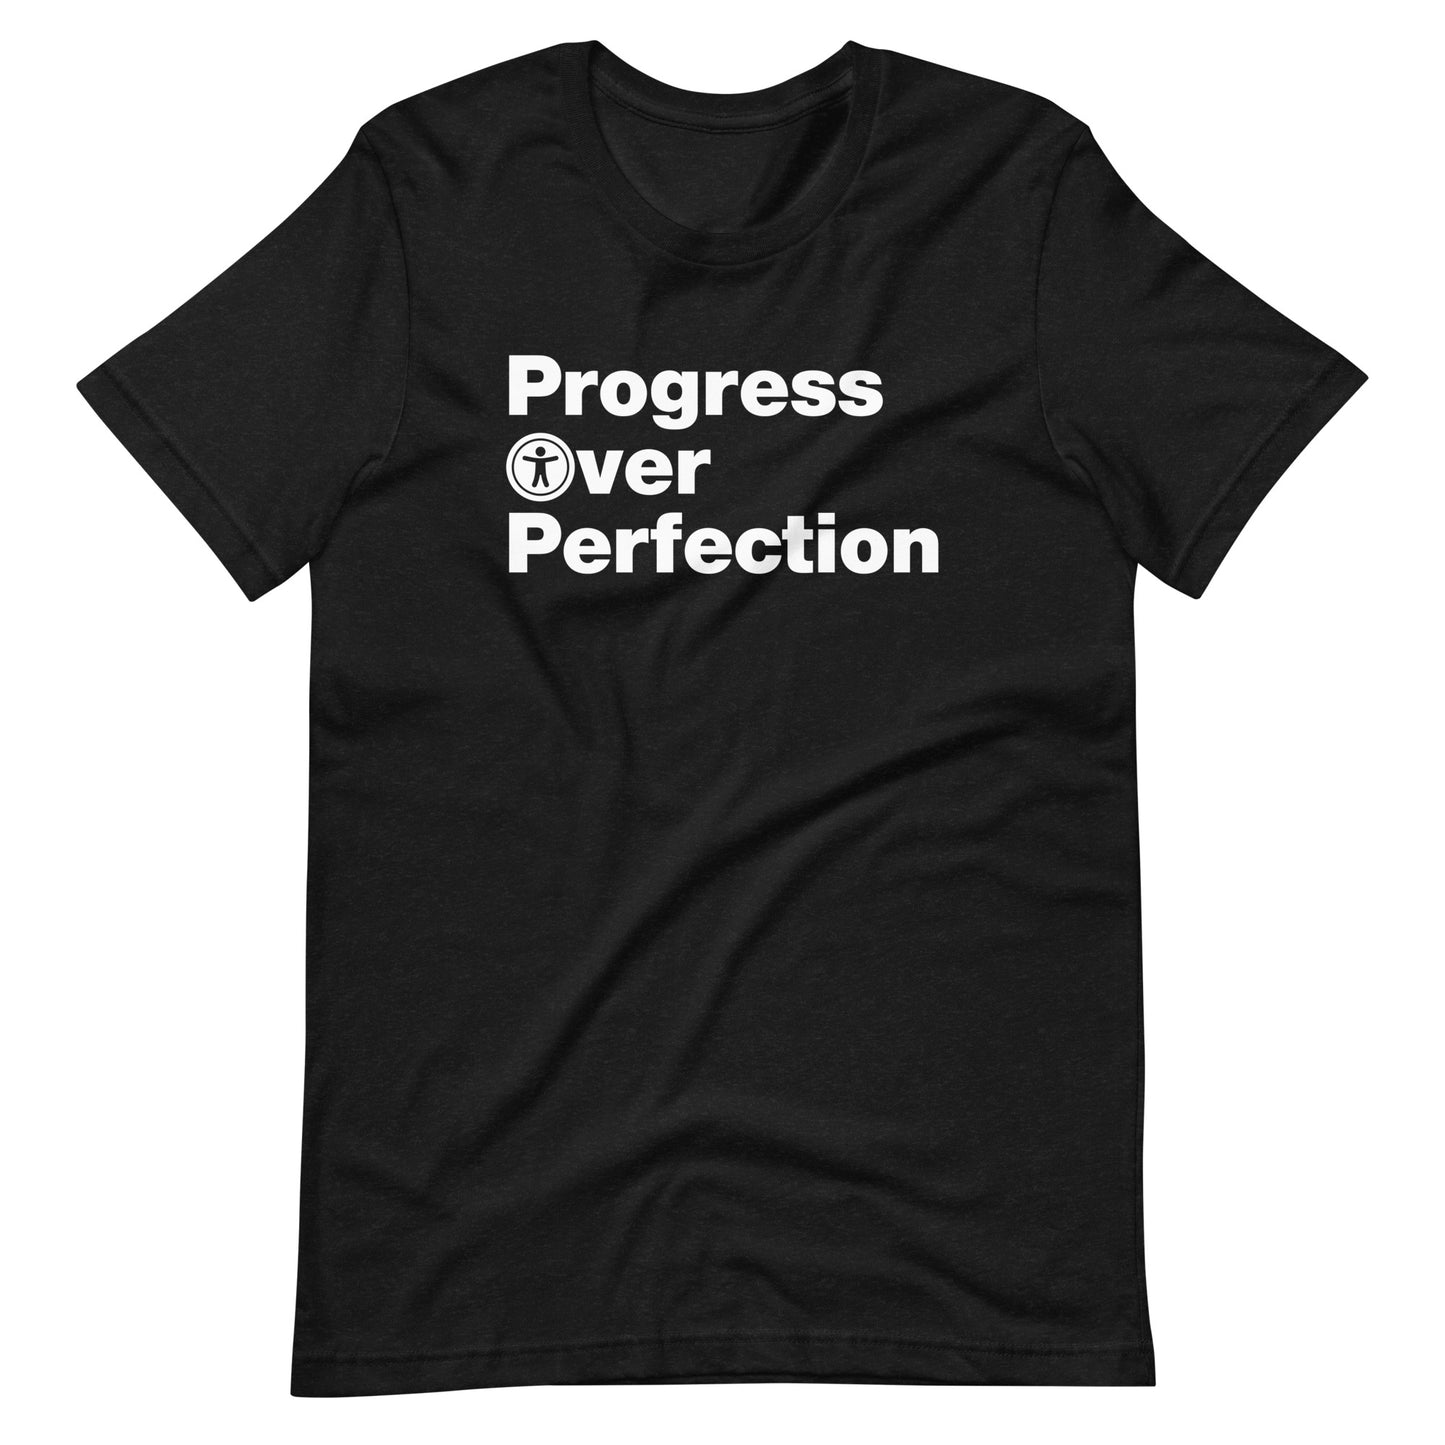 White, Progress Over Perfection, words, stacked, left aligned. 'O' in Over is round universal icon, on front of heather black t-shirt.